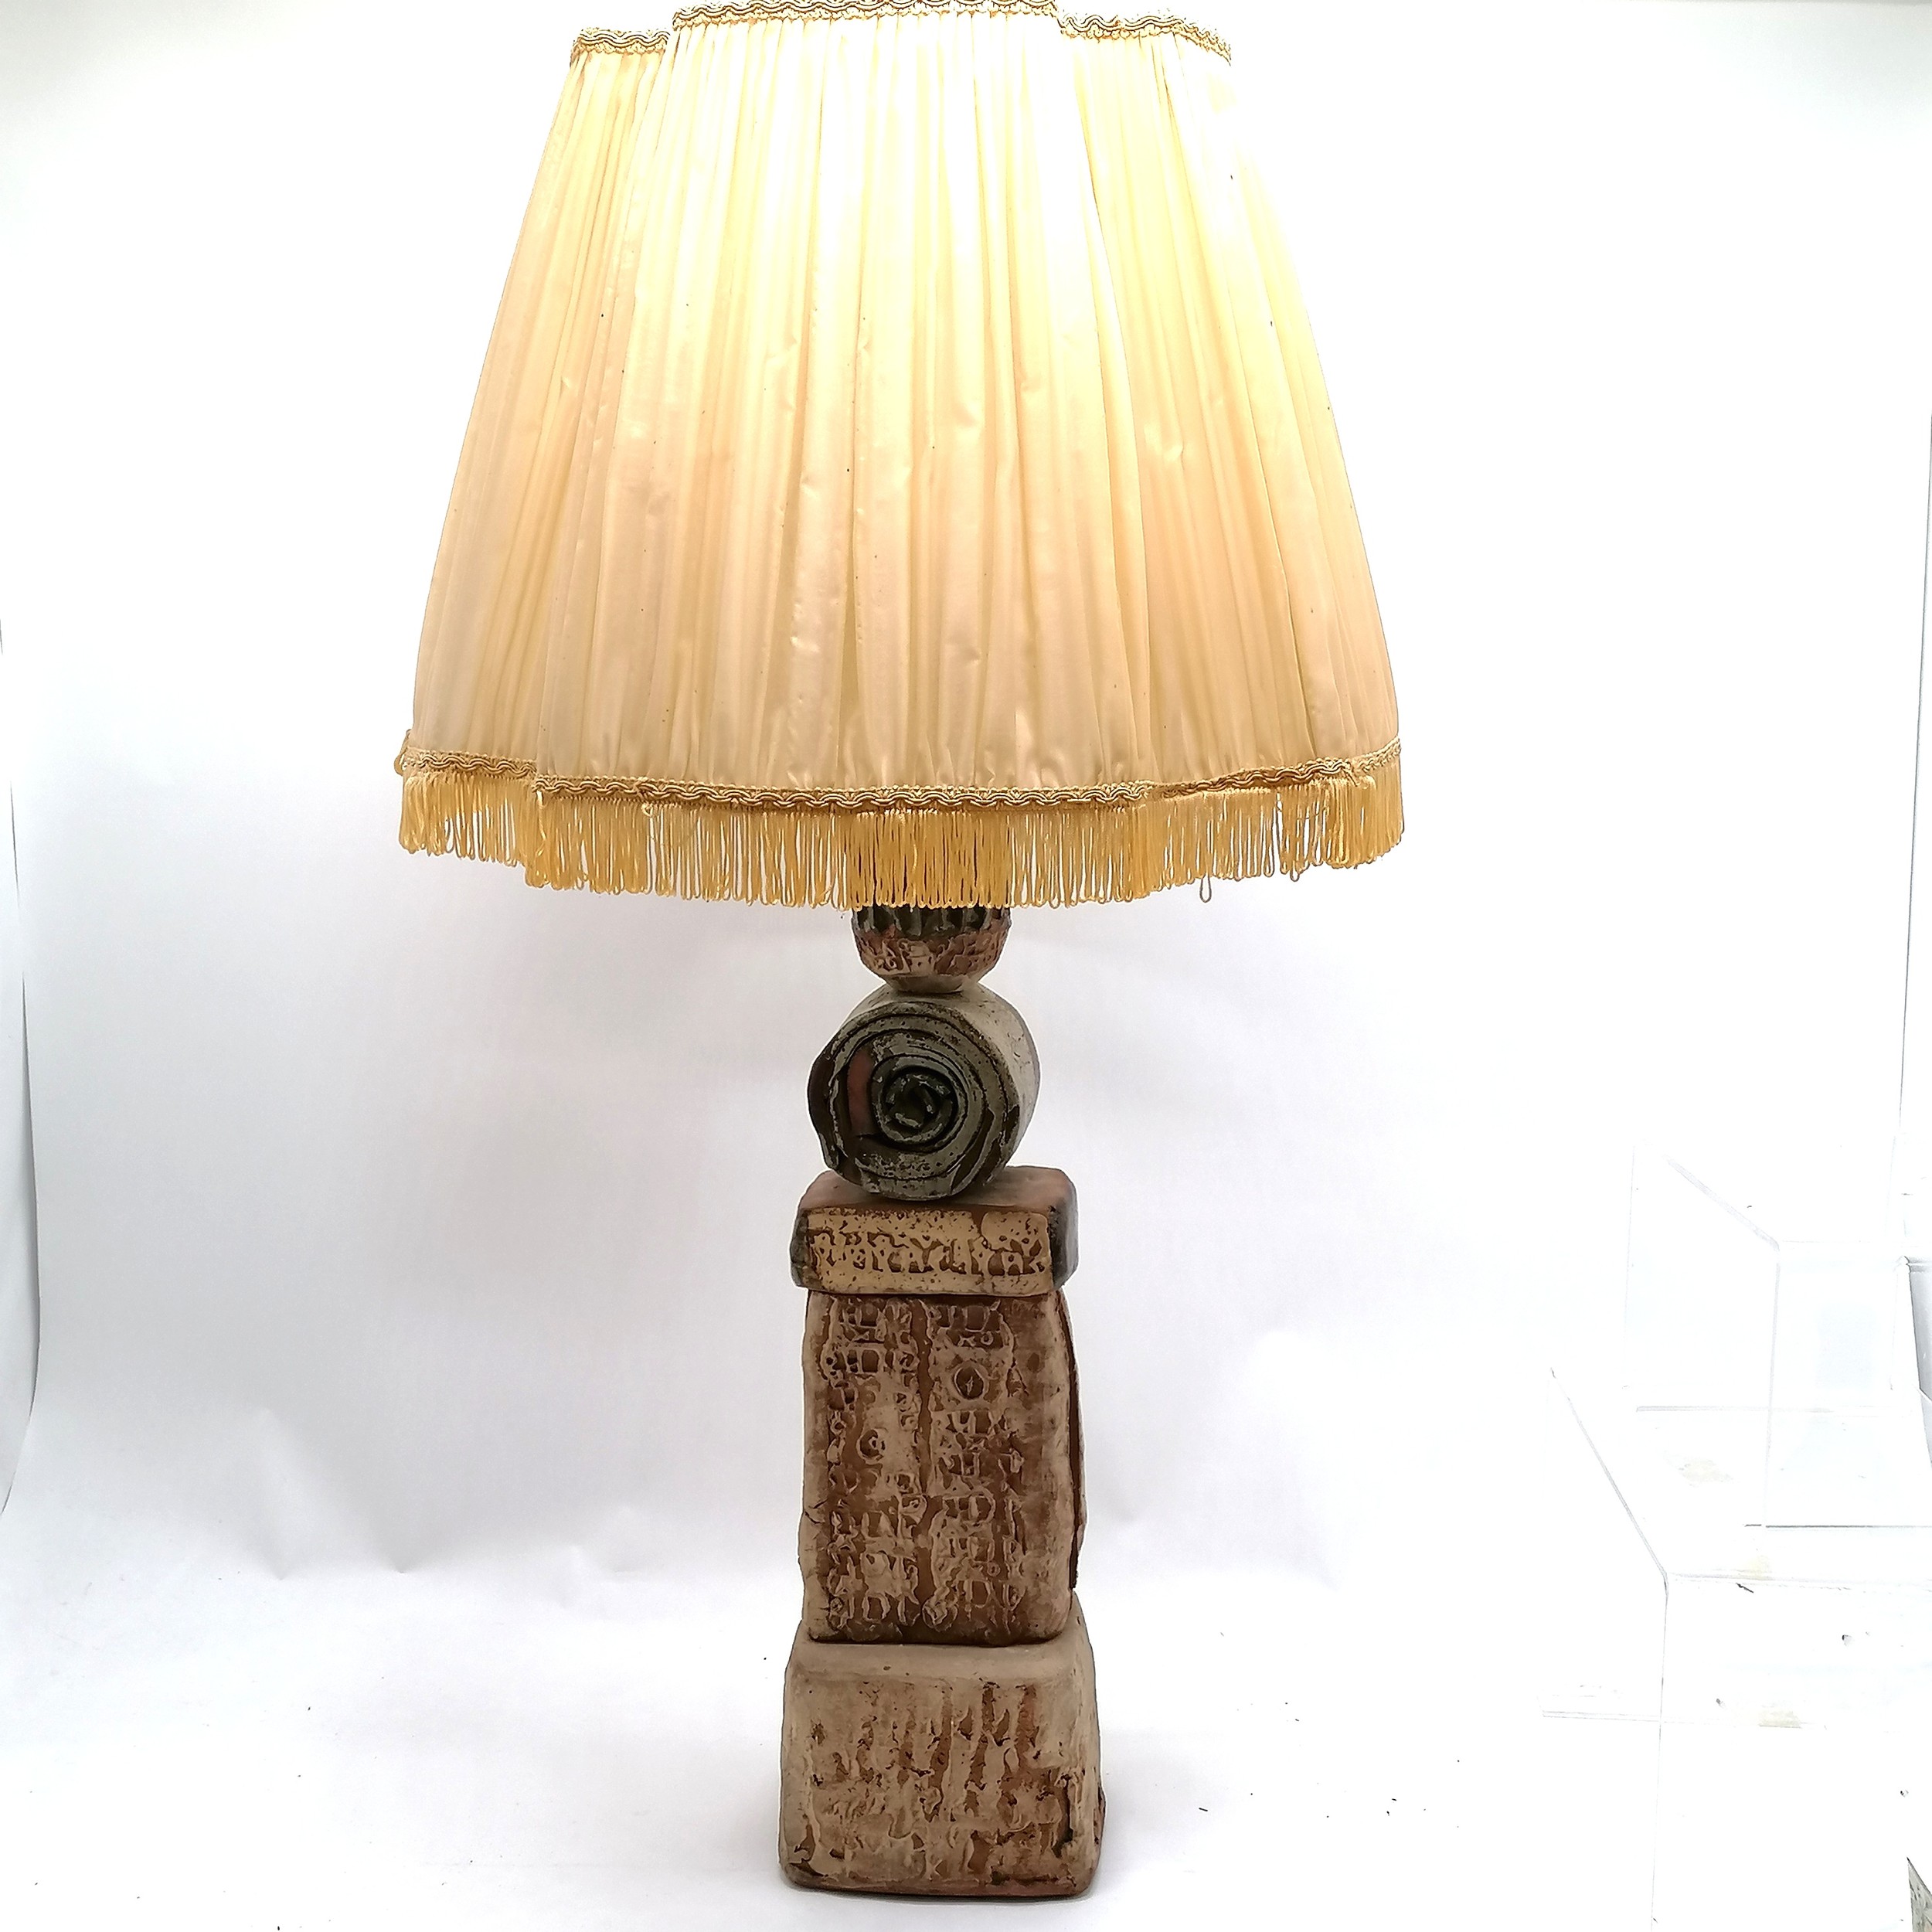 Large studio pottery slabwork (Tremar?) lamp with shade - total height 91cm - Image 2 of 6